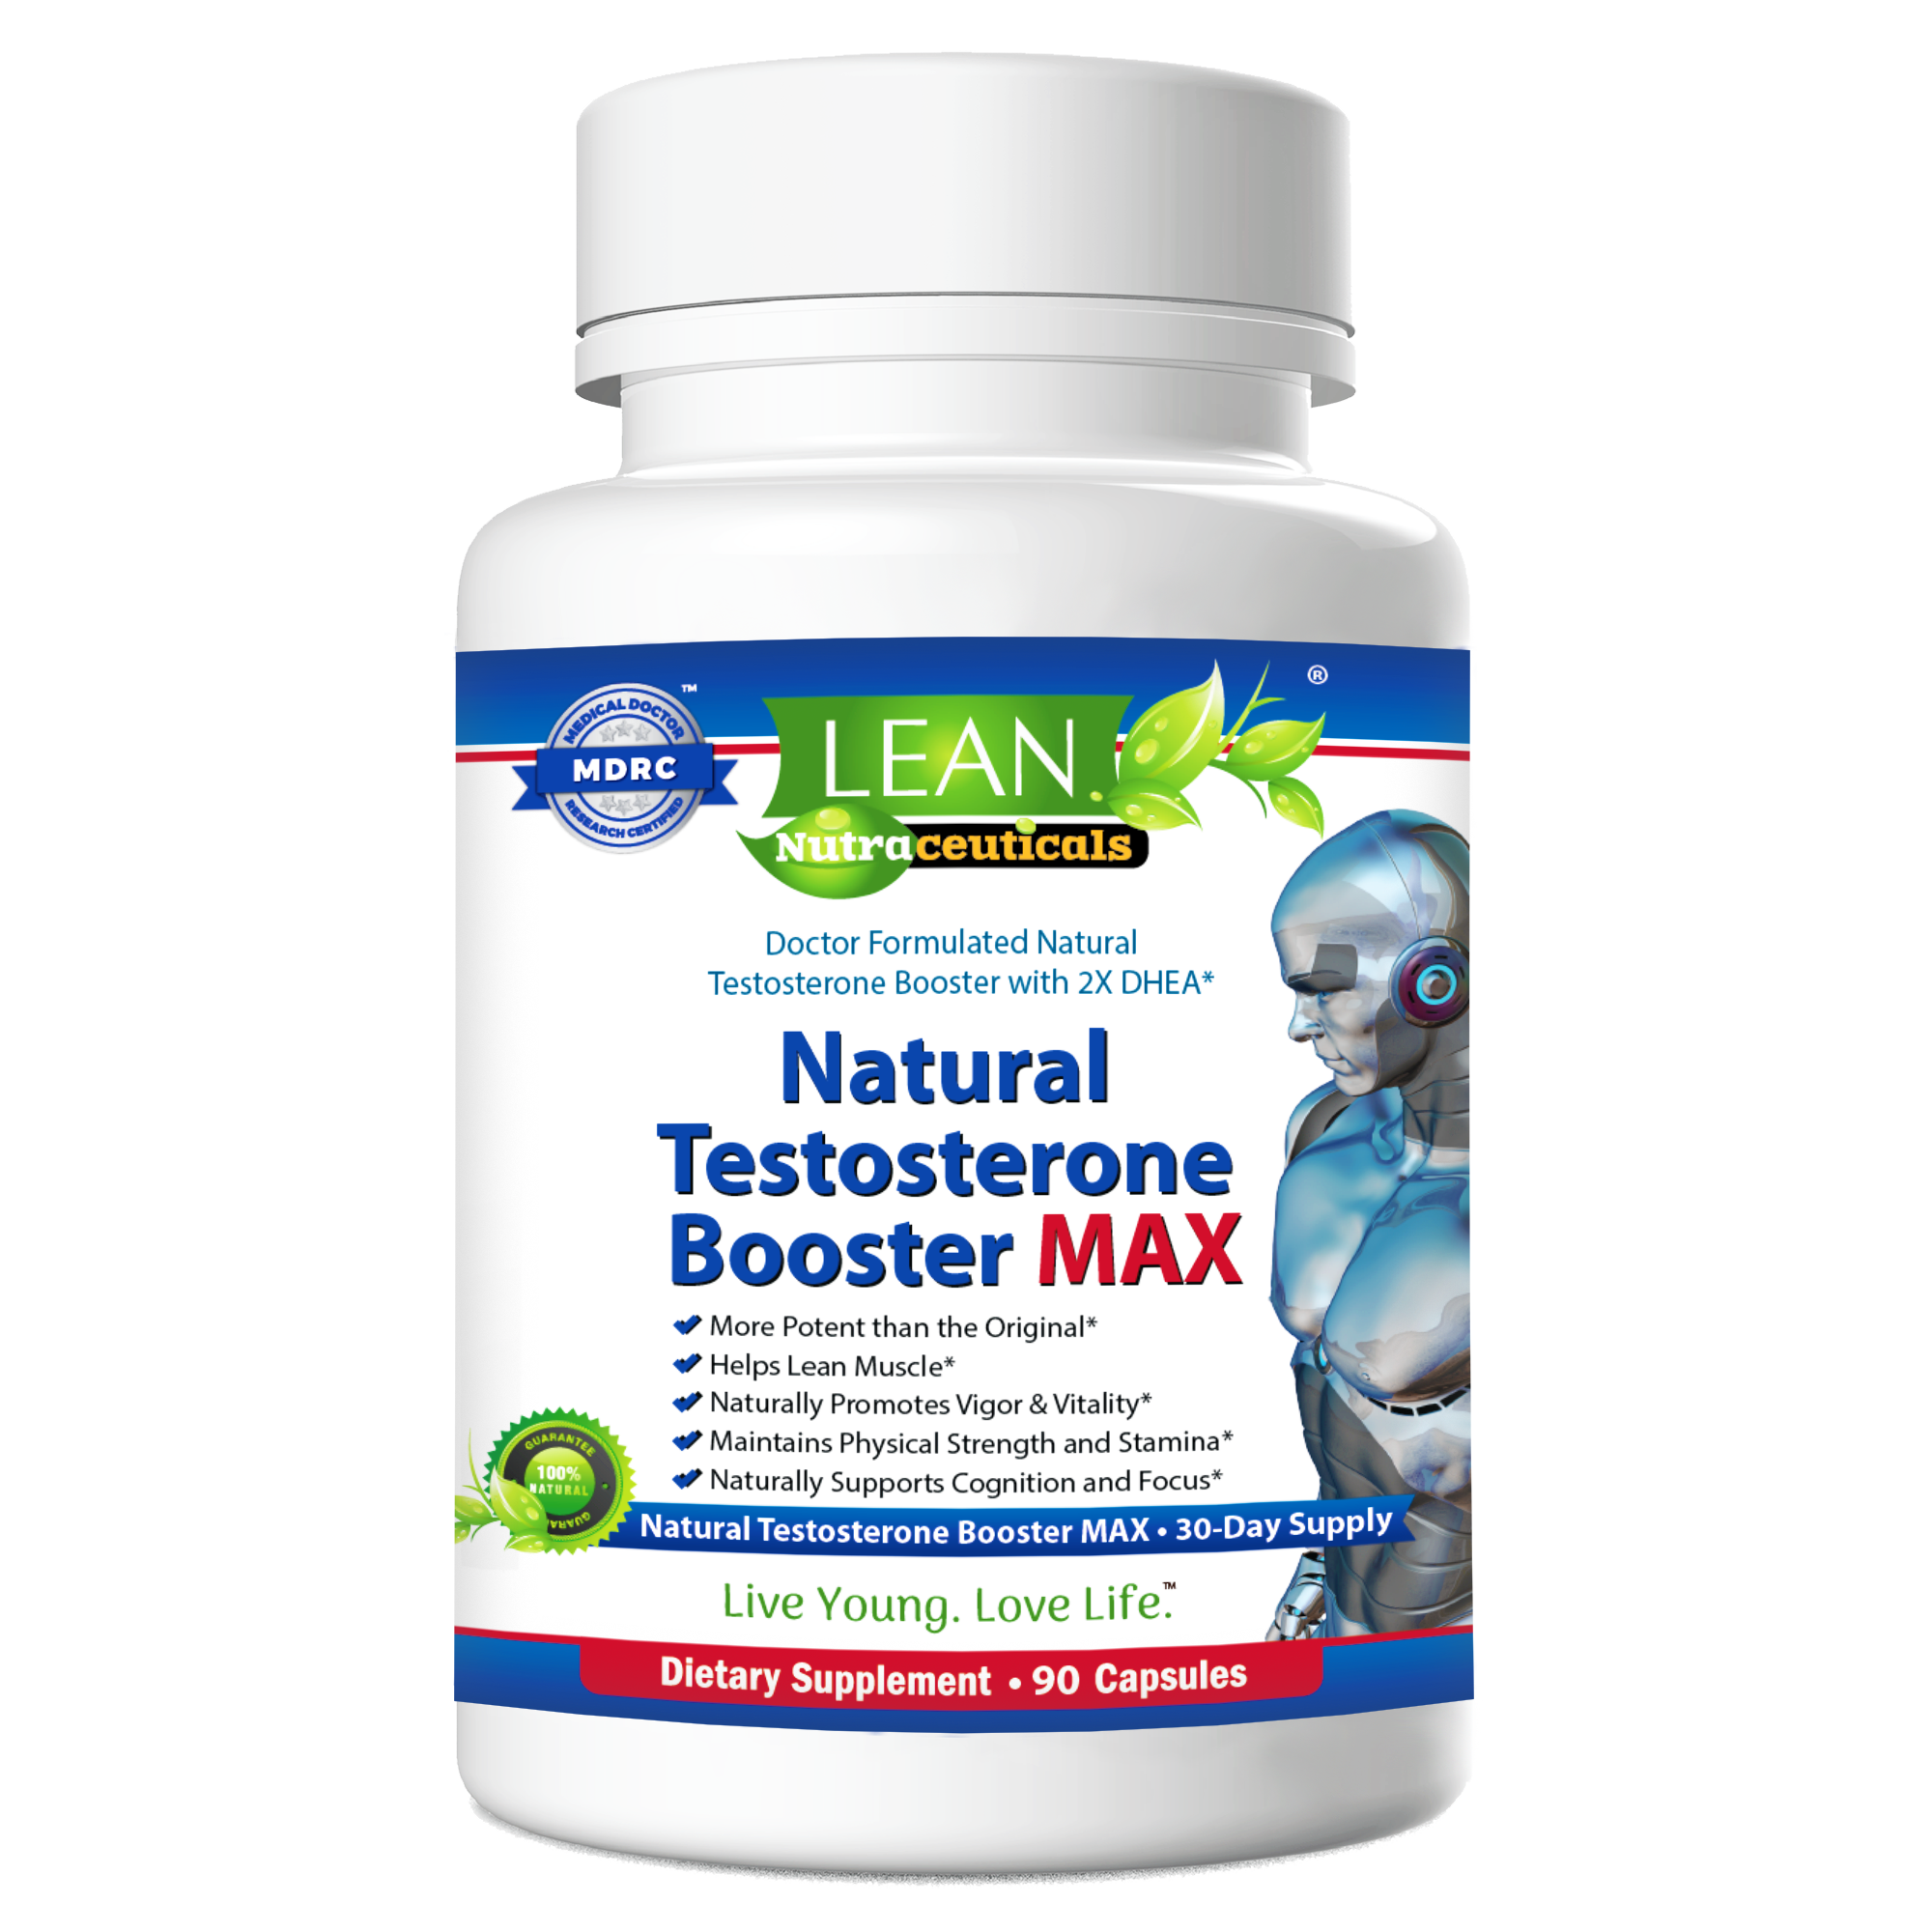 Lean Nutraceuticals Natural Testosterone Booster Max 90caps Bottle Front